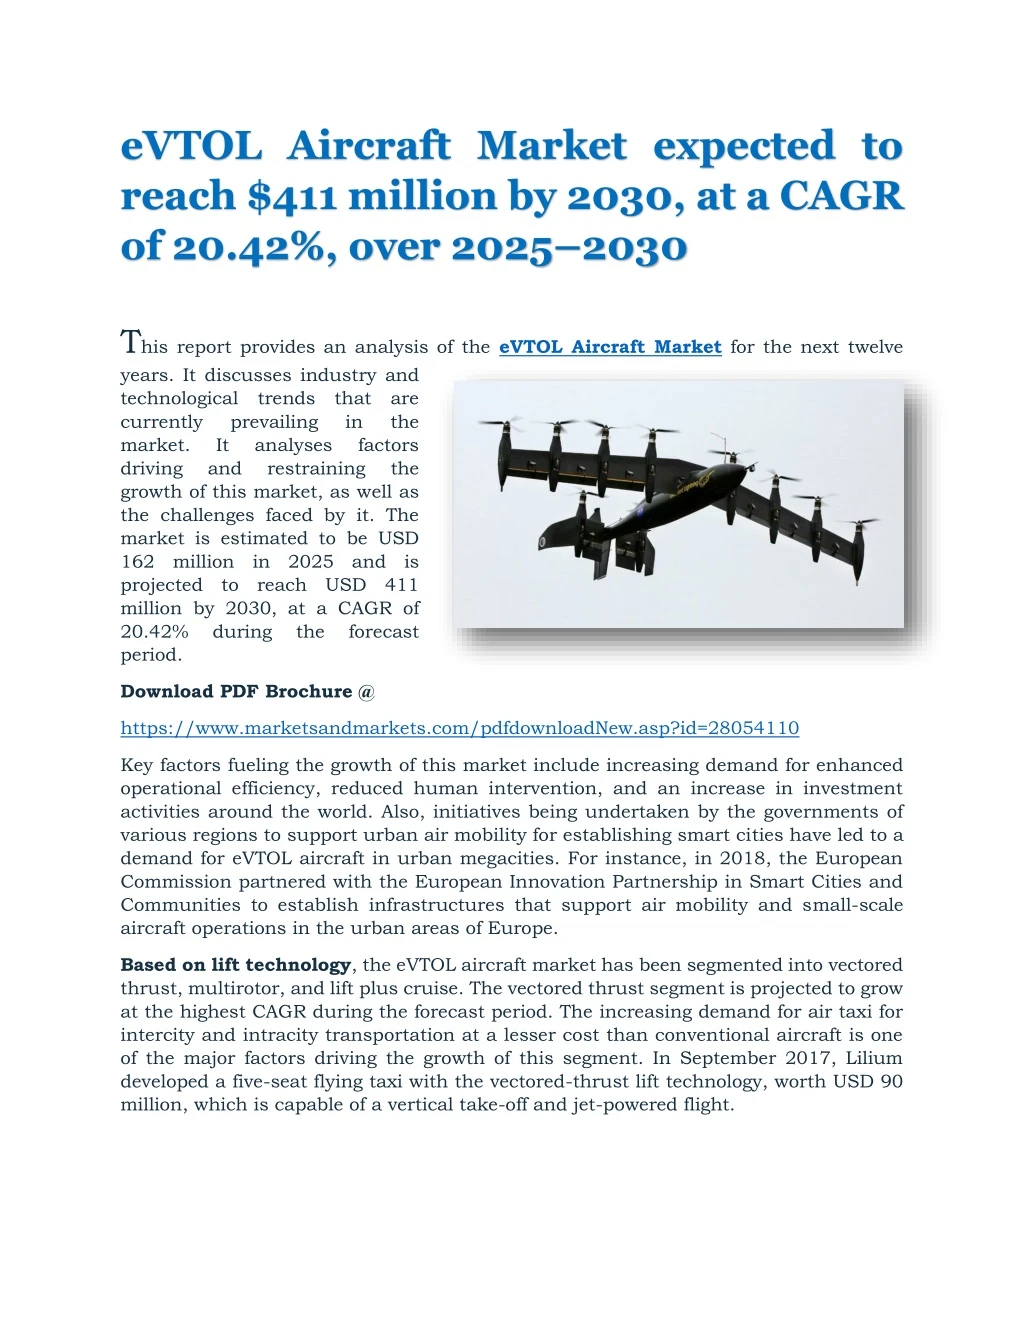 evtol aircraft market expected to reach